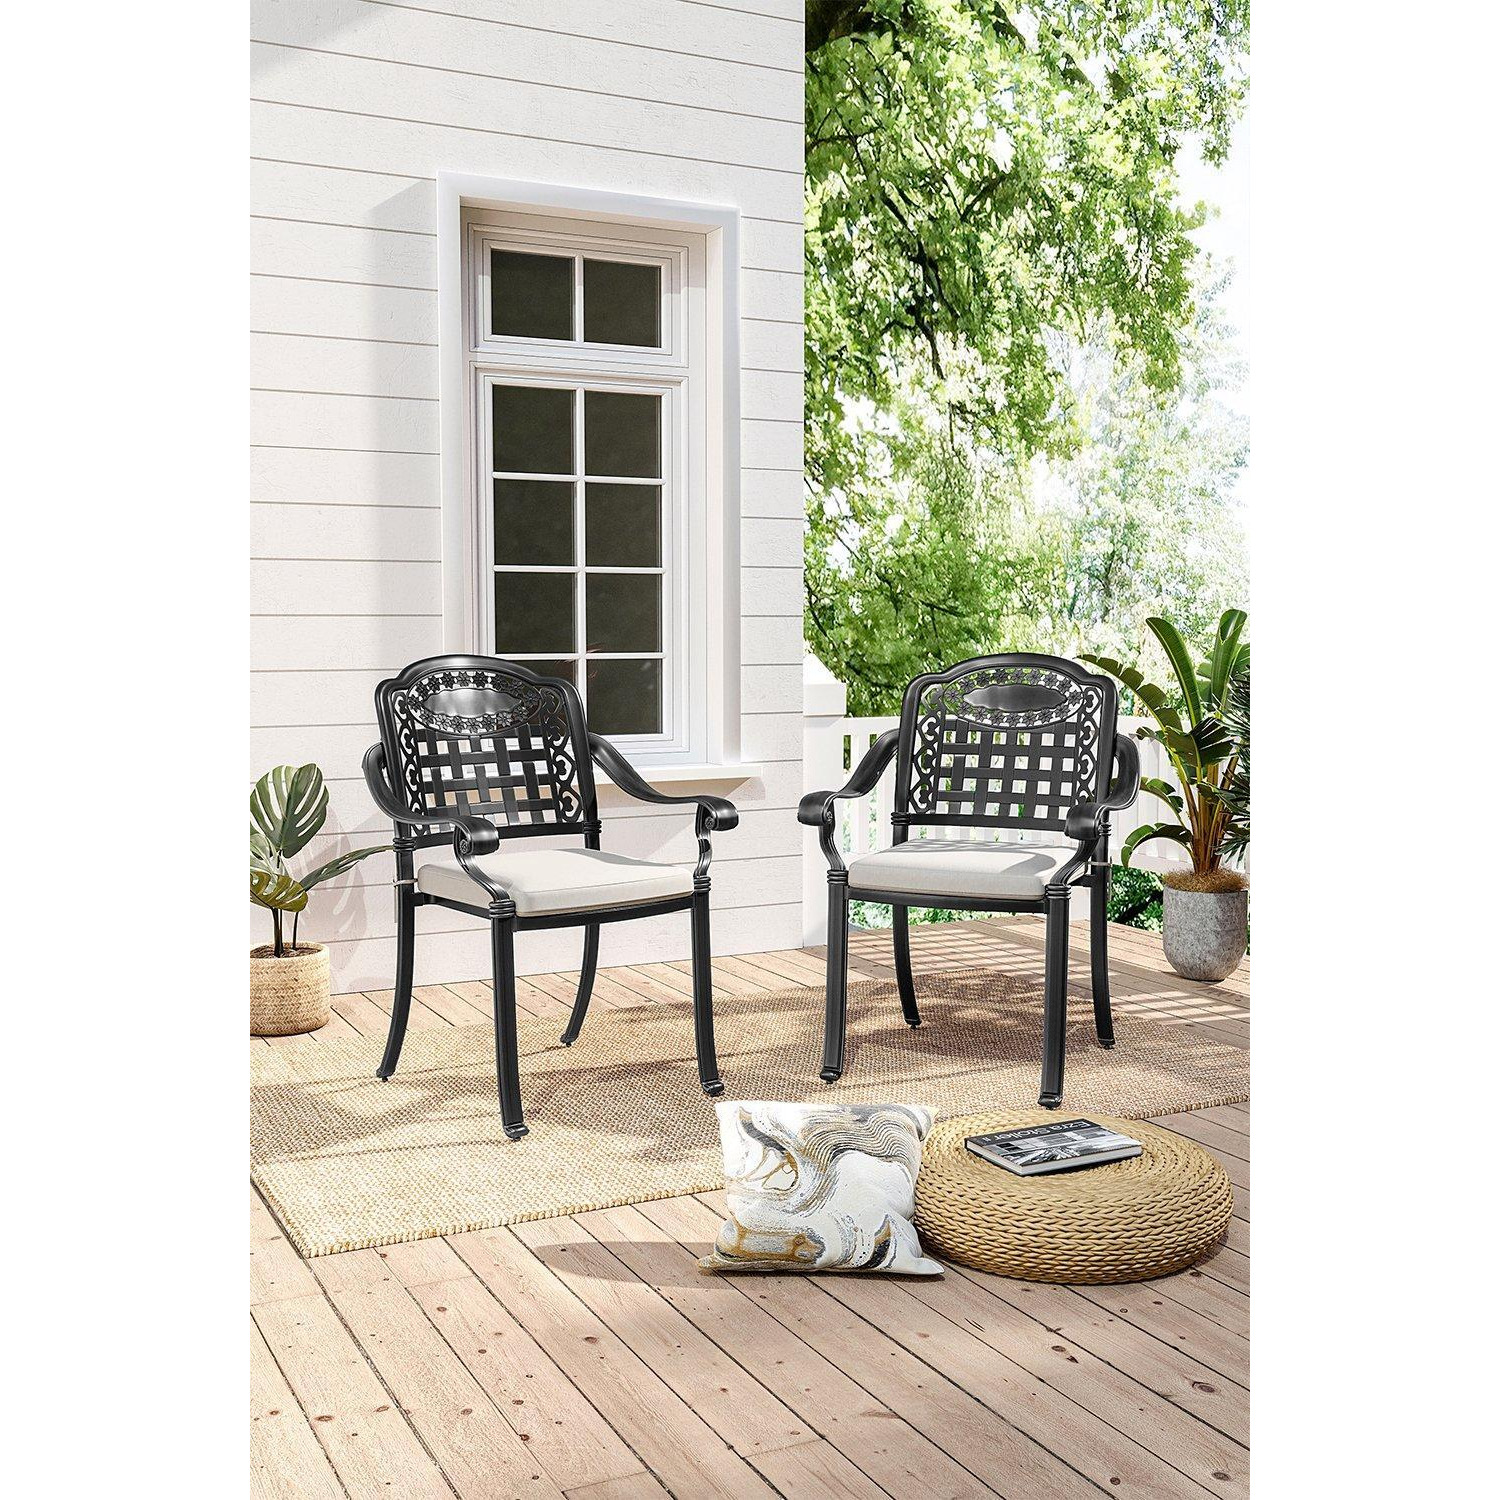 Set of 2 Outdoor Dining Chairs with Cushions - image 1